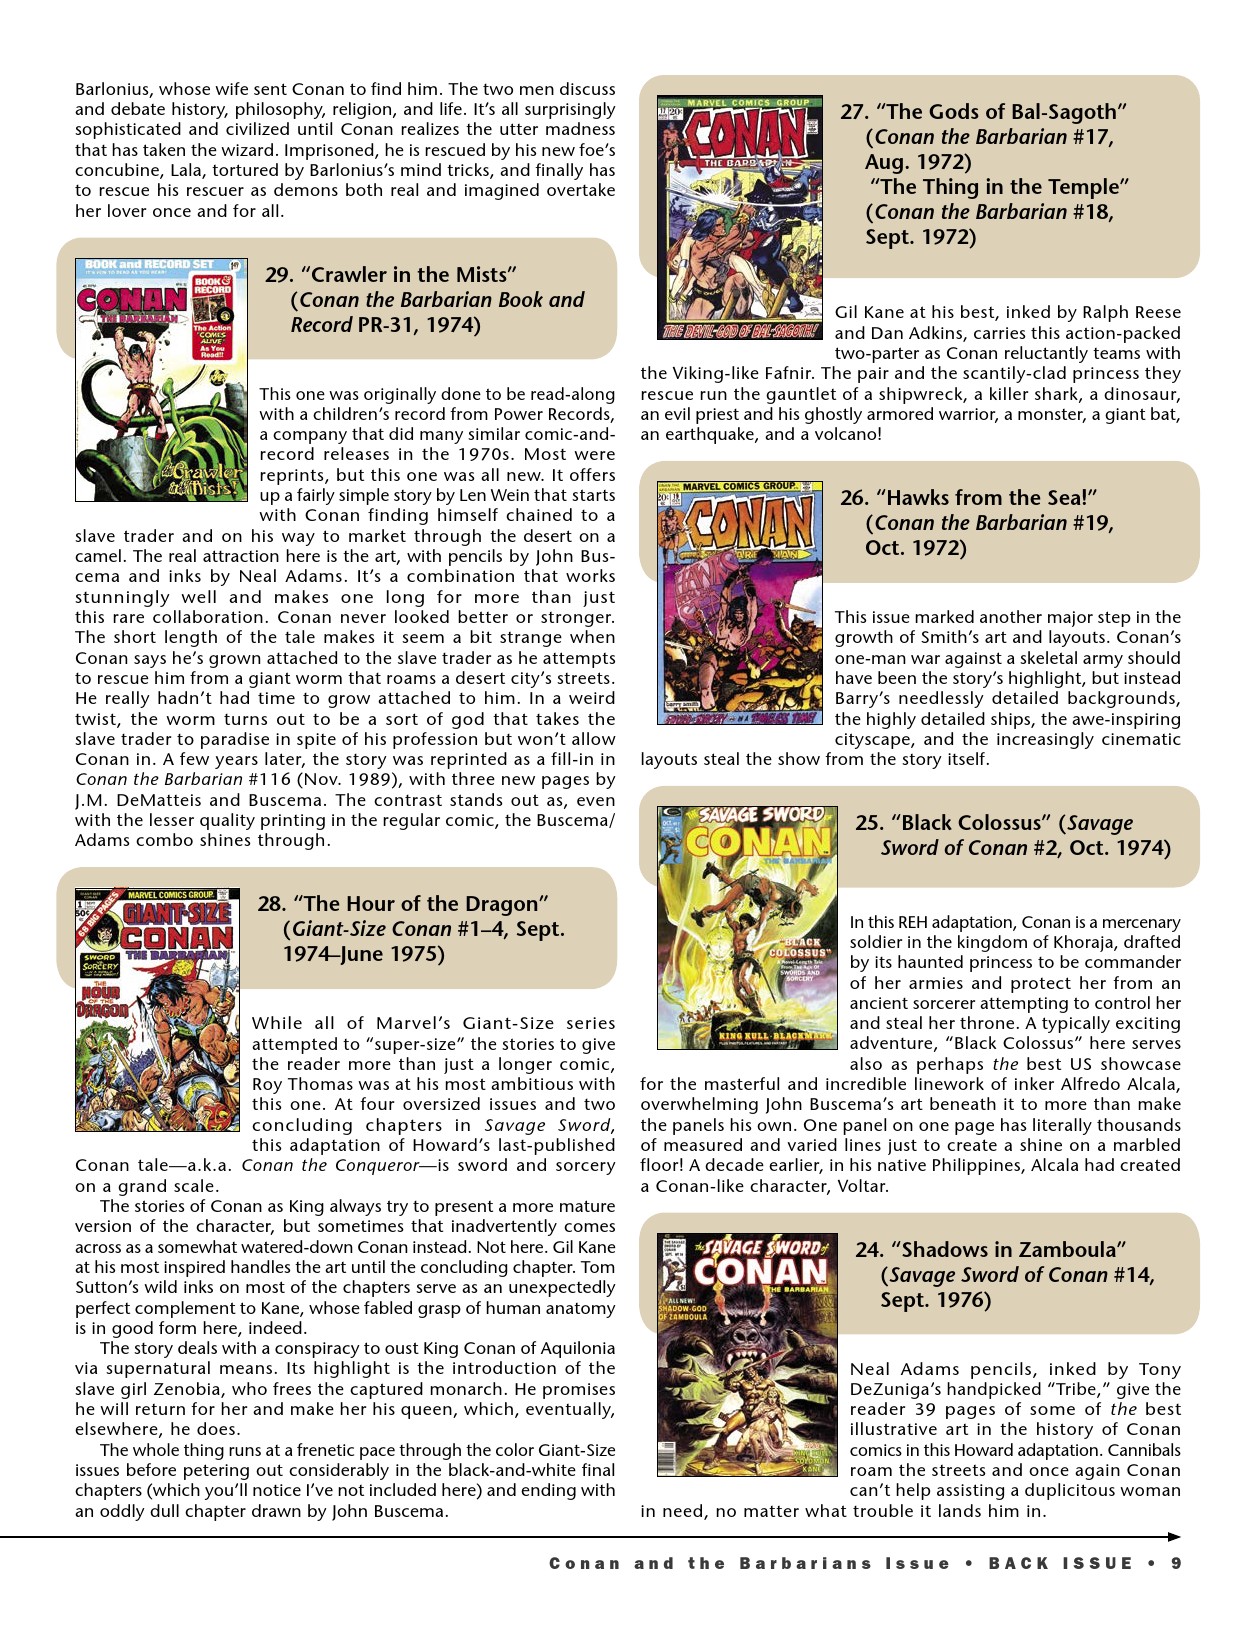 Read online Back Issue comic -  Issue #121 - 11